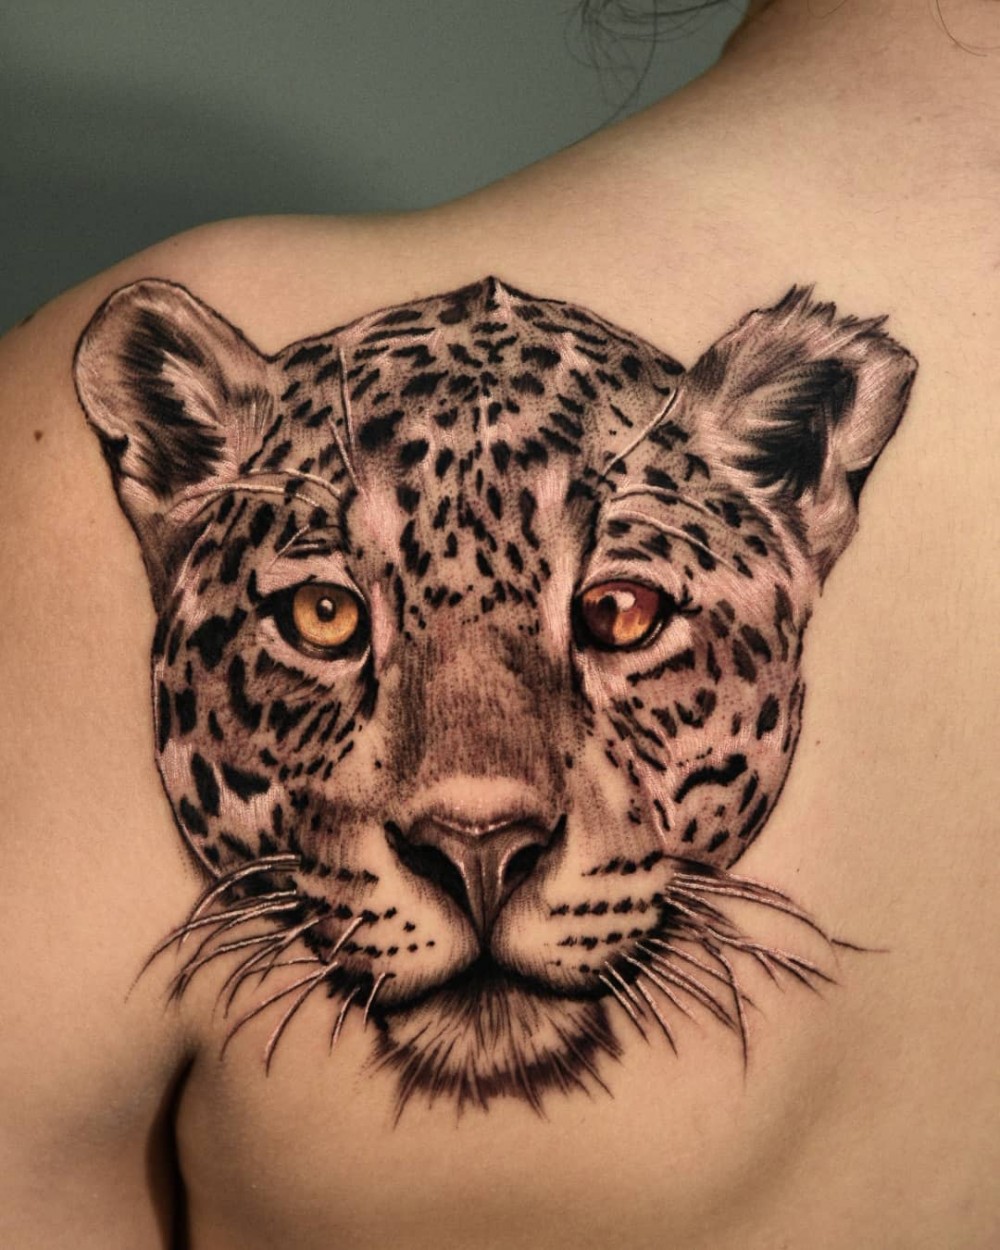 Here Are 75+ Unique Traditional Jaguars Tattoo Ideas That Will Give ...